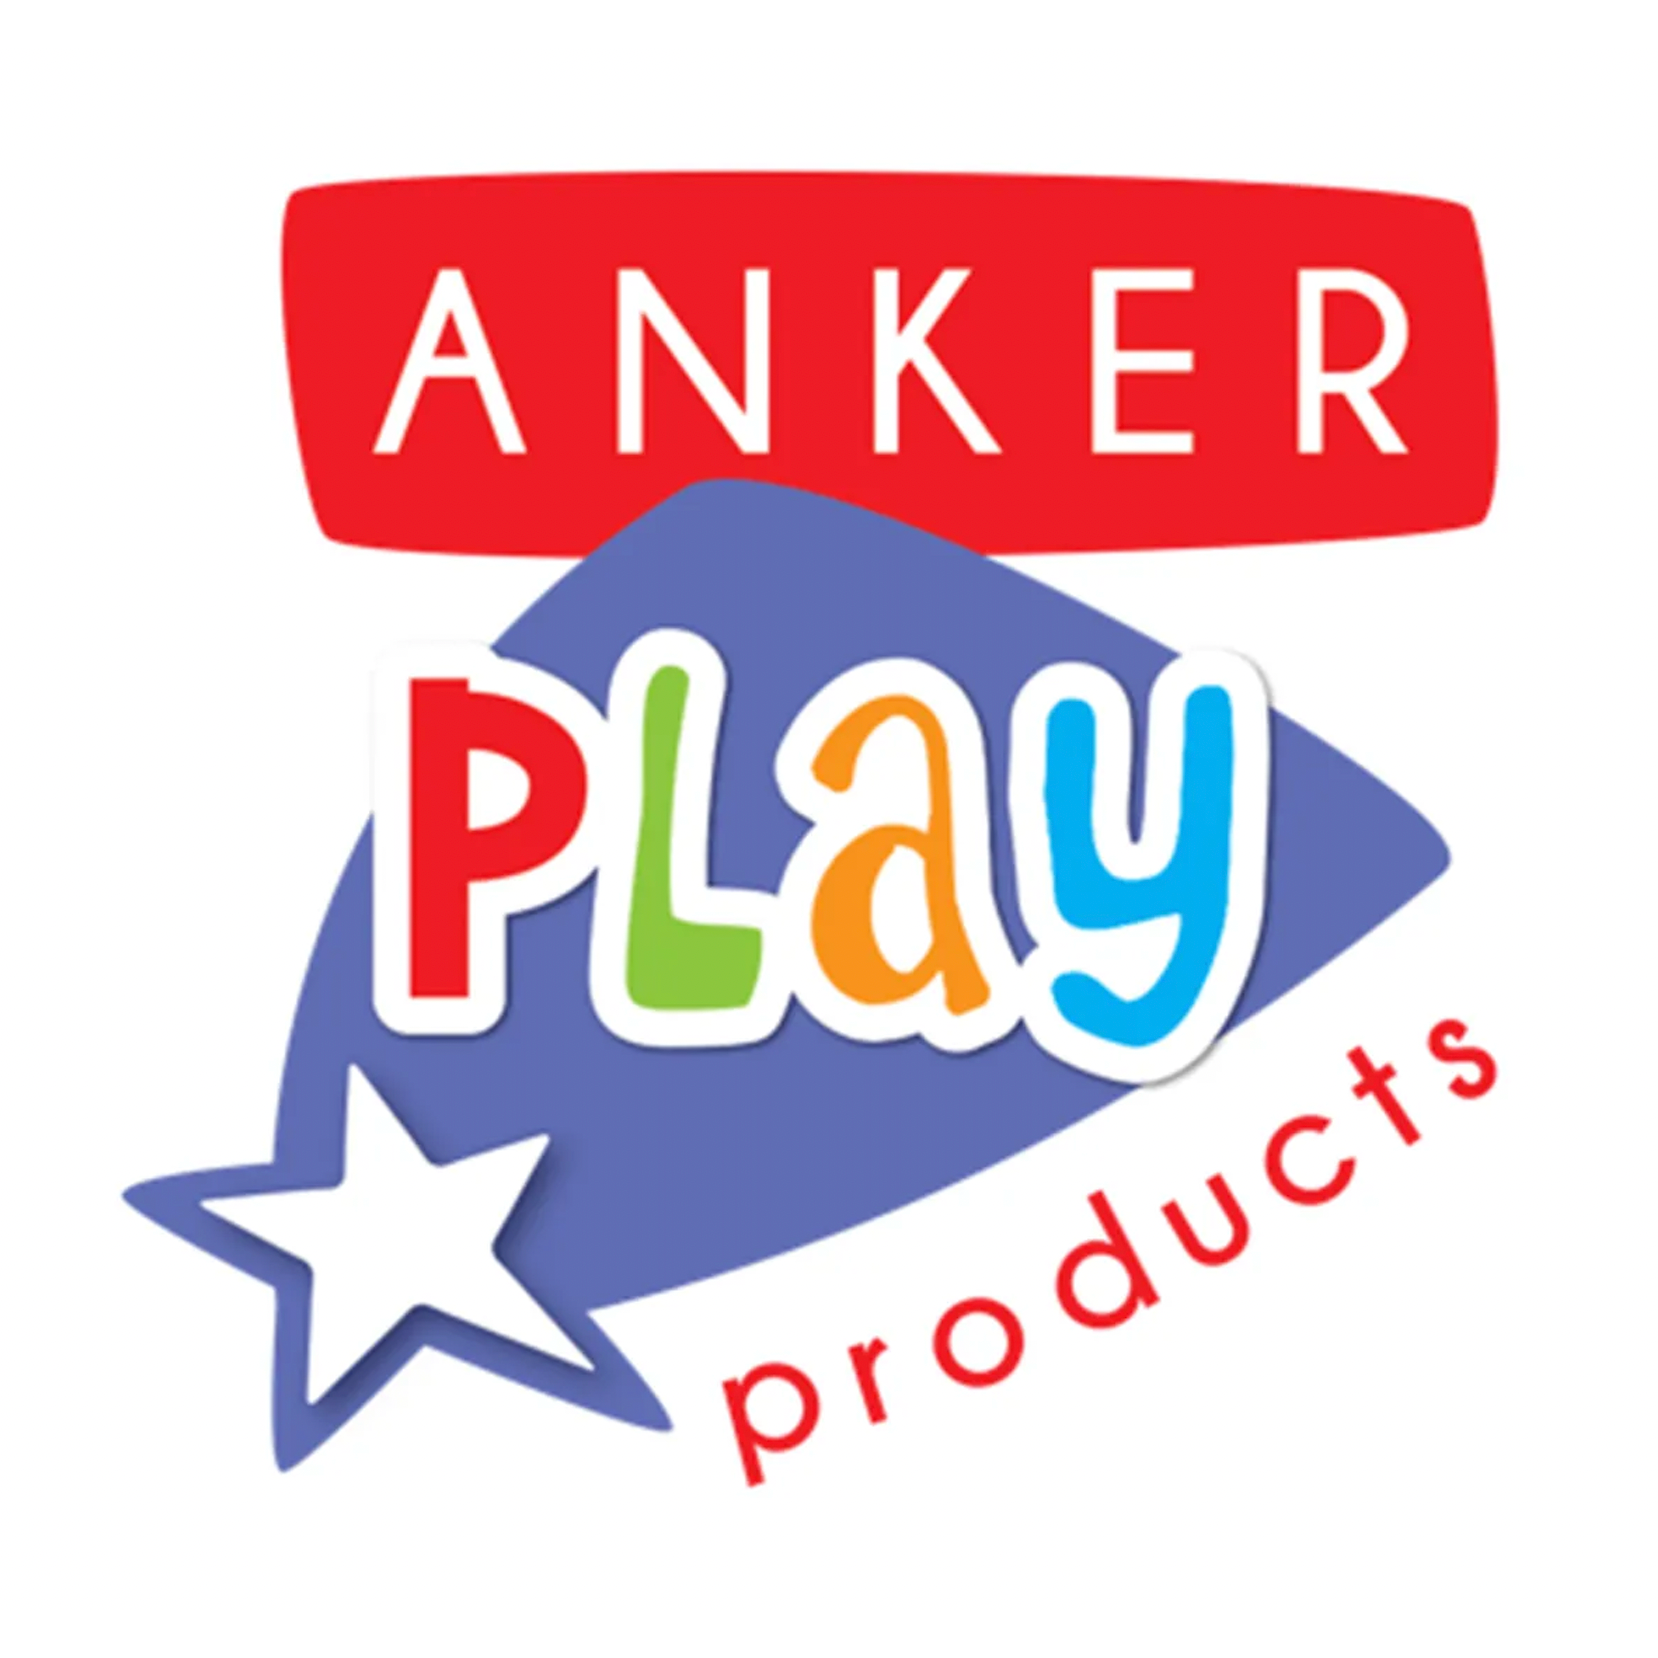 Anker Play Bubble Workz Giant Bubbles-Anker Play Products-Little Giant Kidz